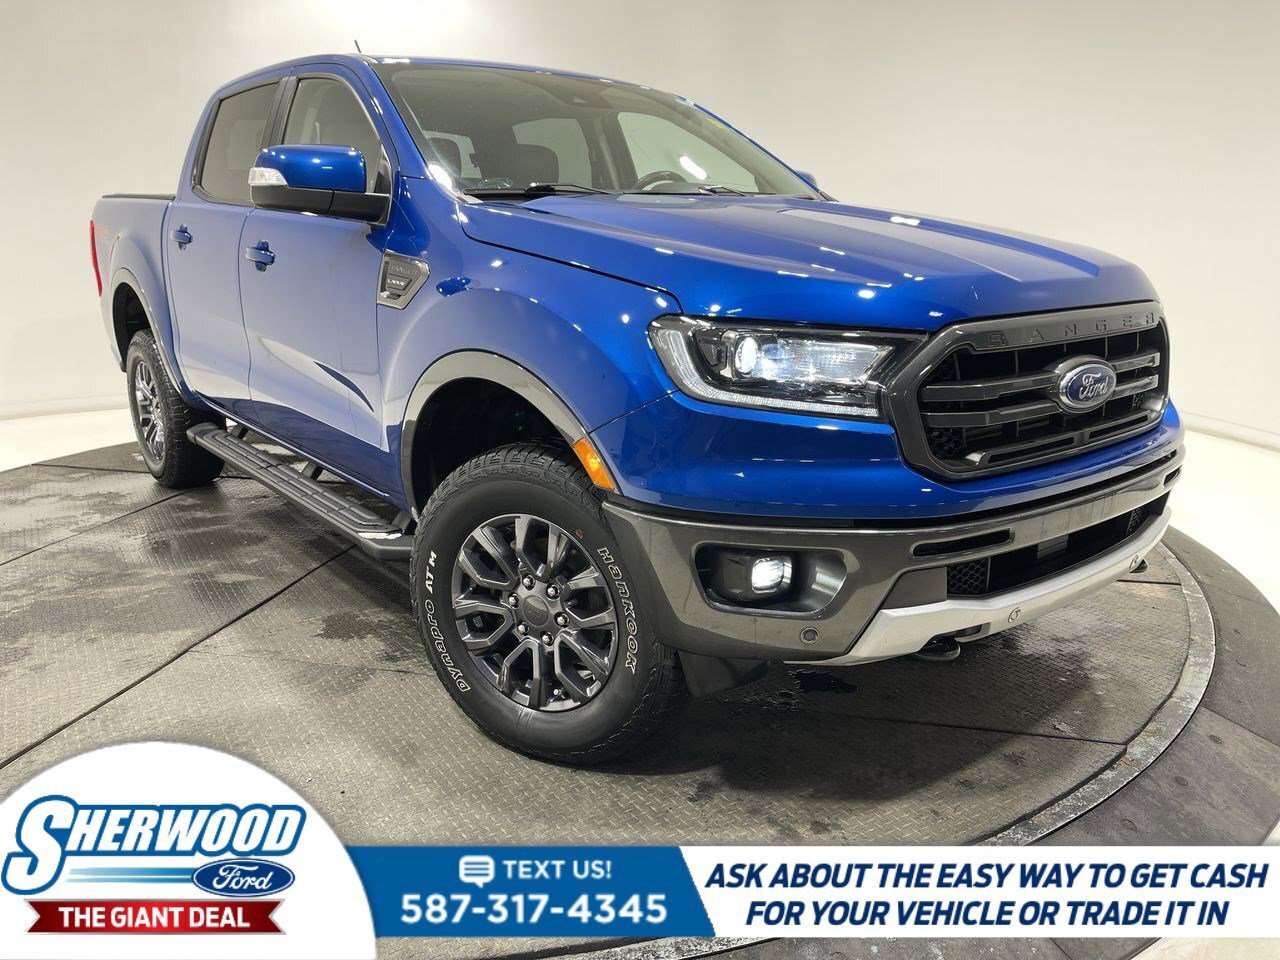 2019 Ford Ranger Lariat- $0 Down $169 Weekly- TECH & TOW PKGS